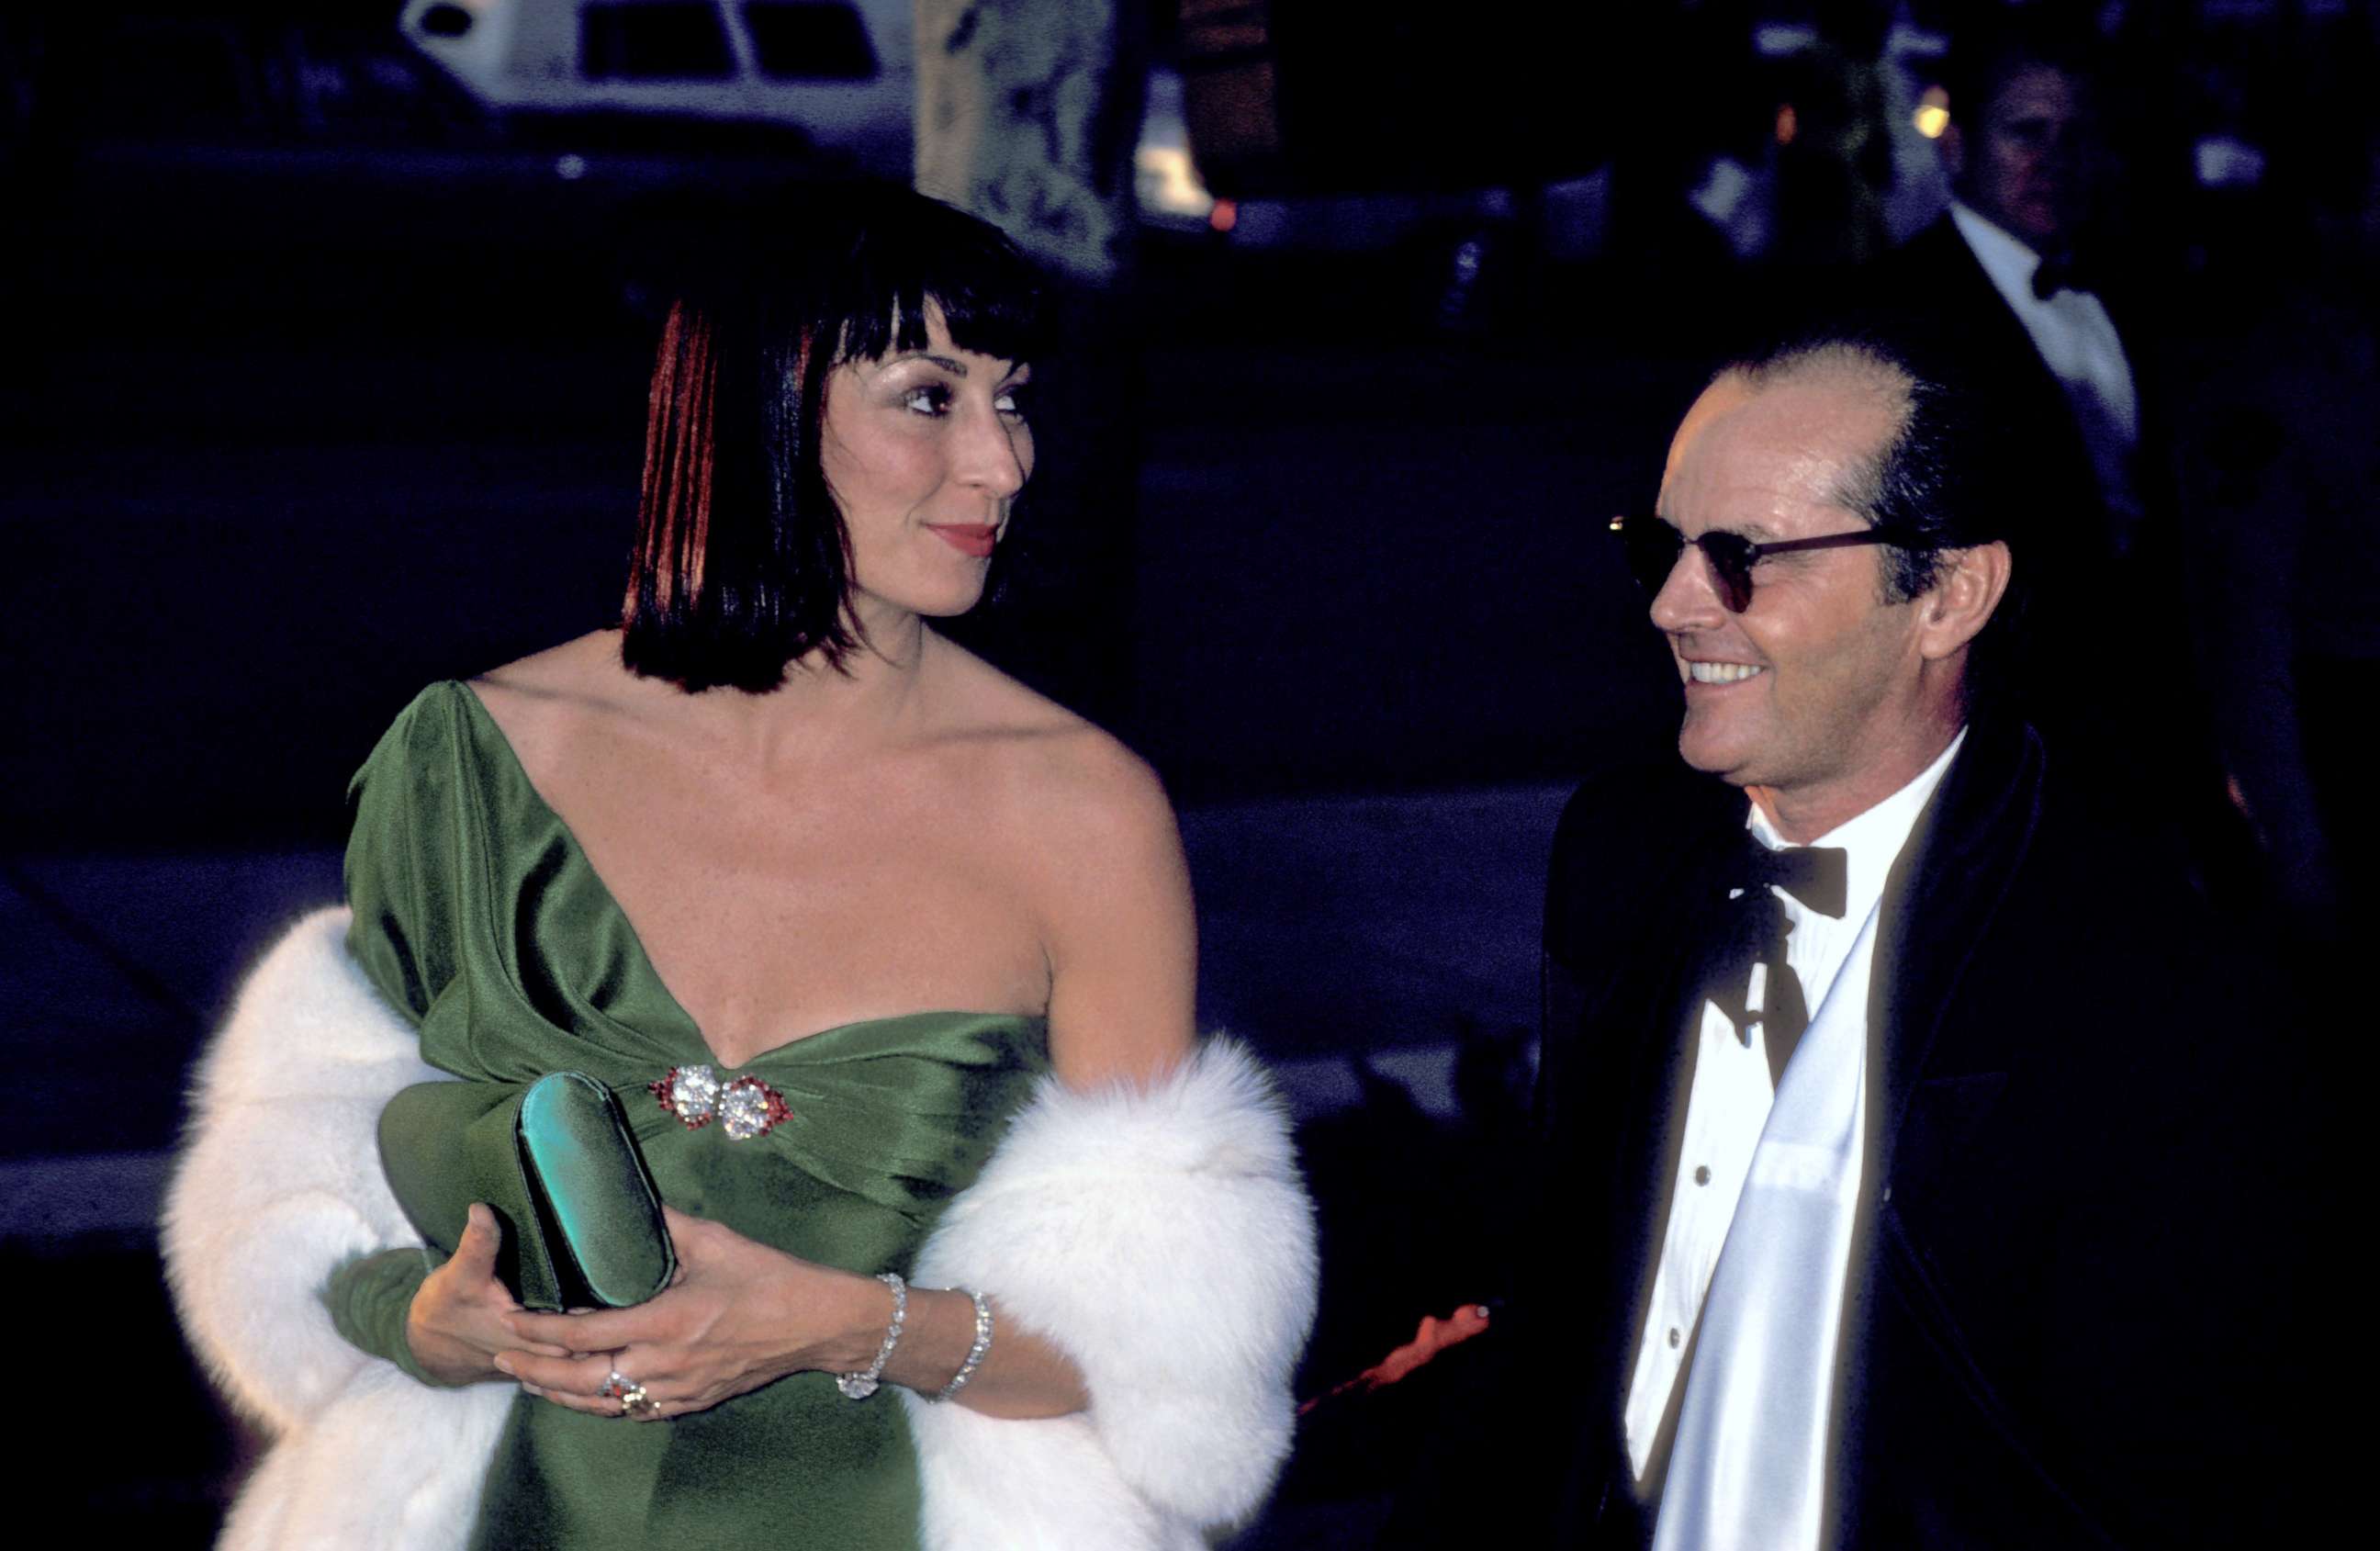 PHOTO: Anjelica Huston and Jack Nicholson arrive for the 58th Annual Academy Awards at Dorothy Chandler Pavillion in Los Angeles, March 24, 1986.